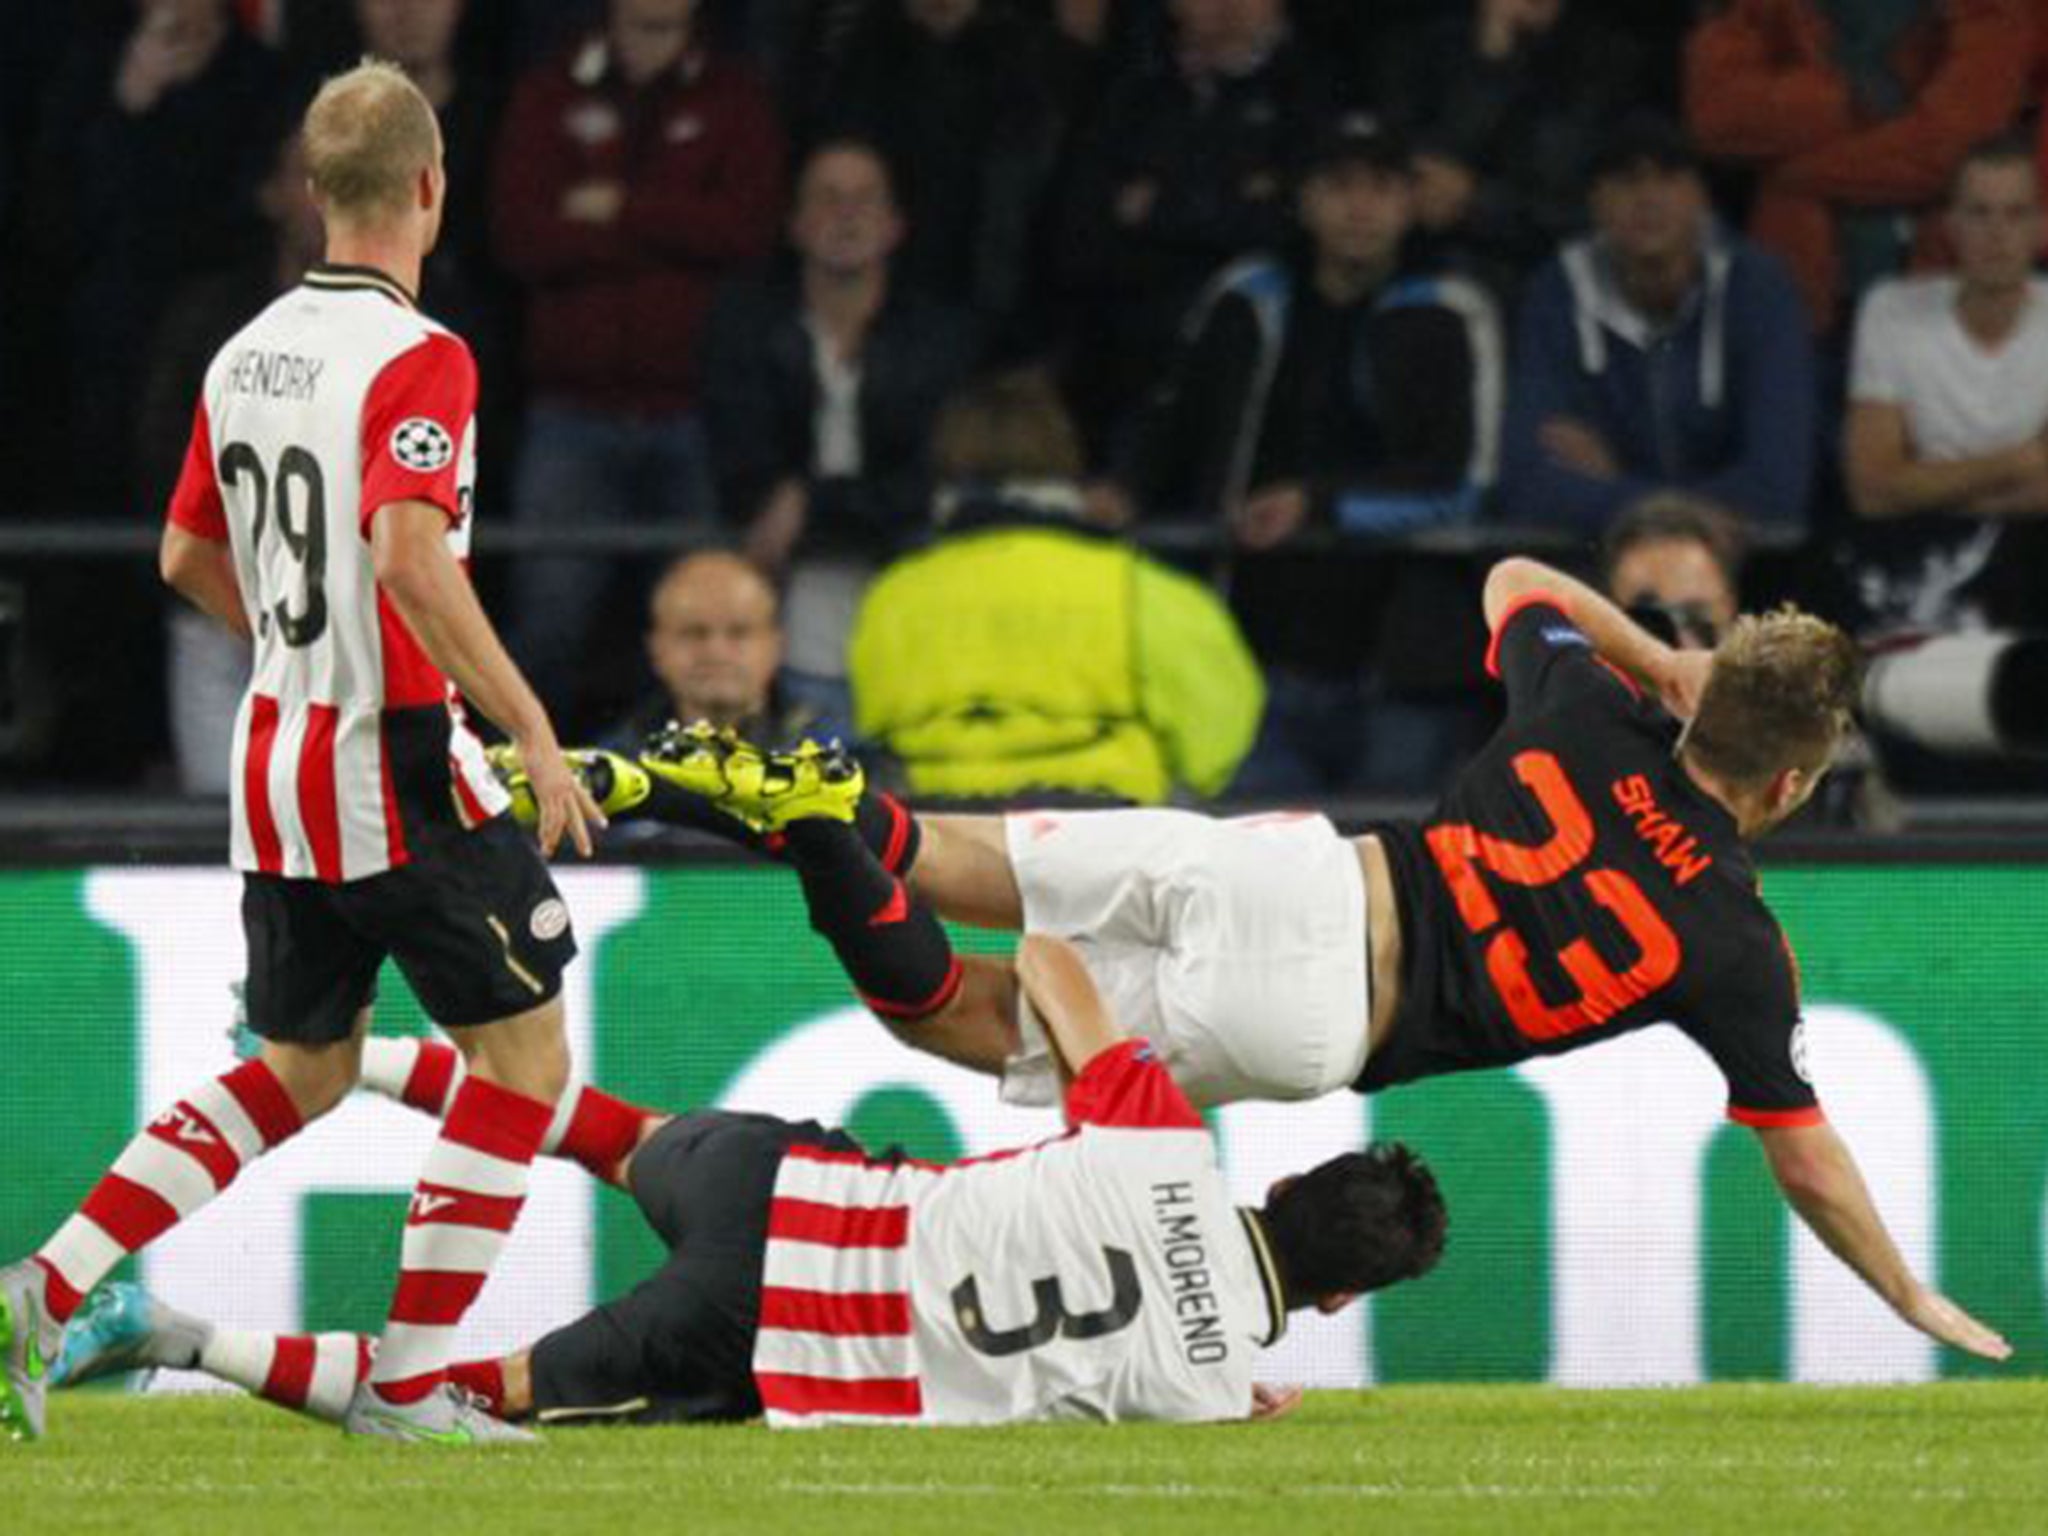 Luke Shaw clashes with Hector Moreno